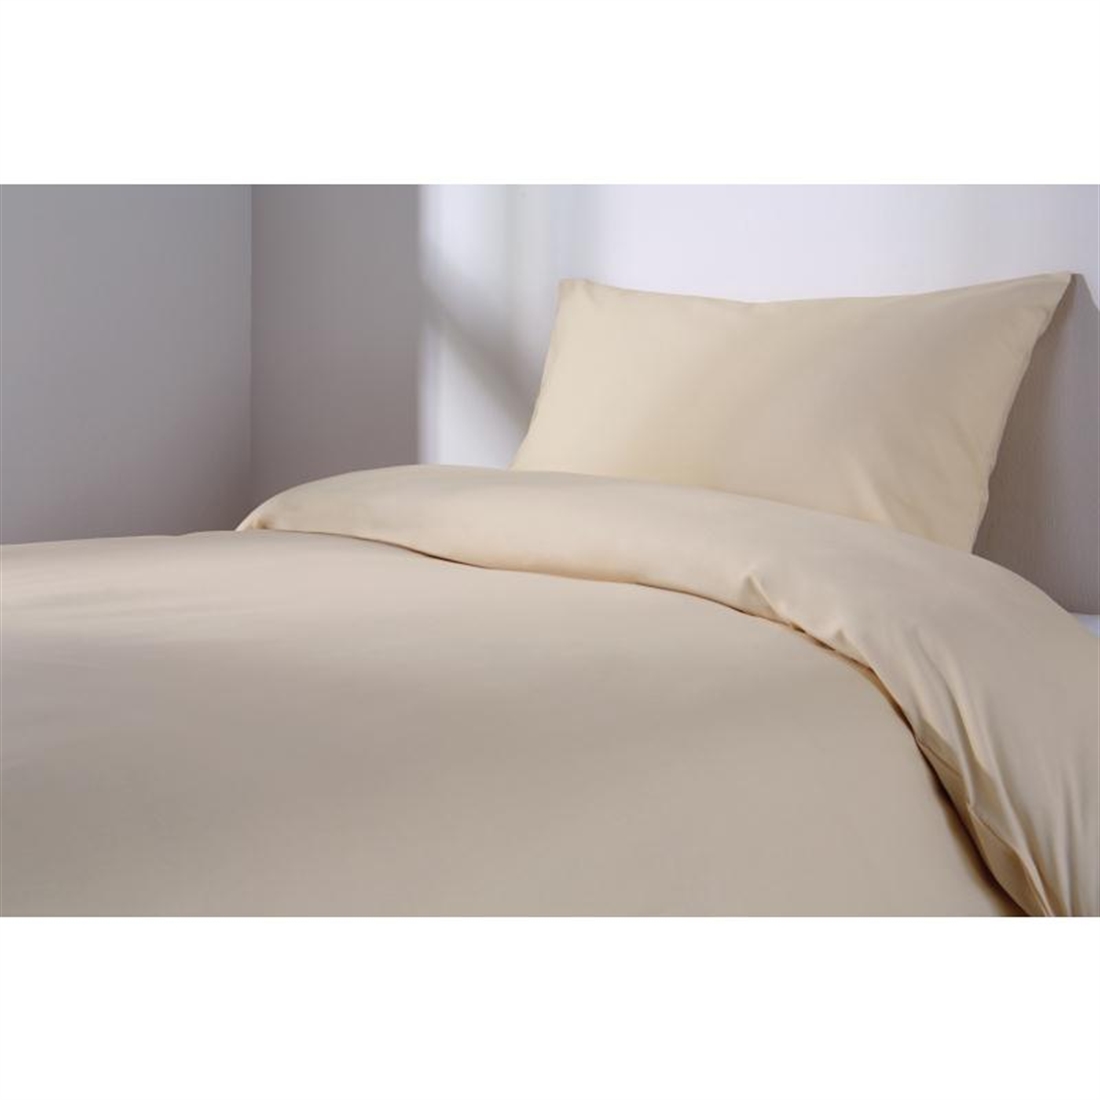 Mitre Essentials Spectrum Fitted Sheet Oatmeal Double